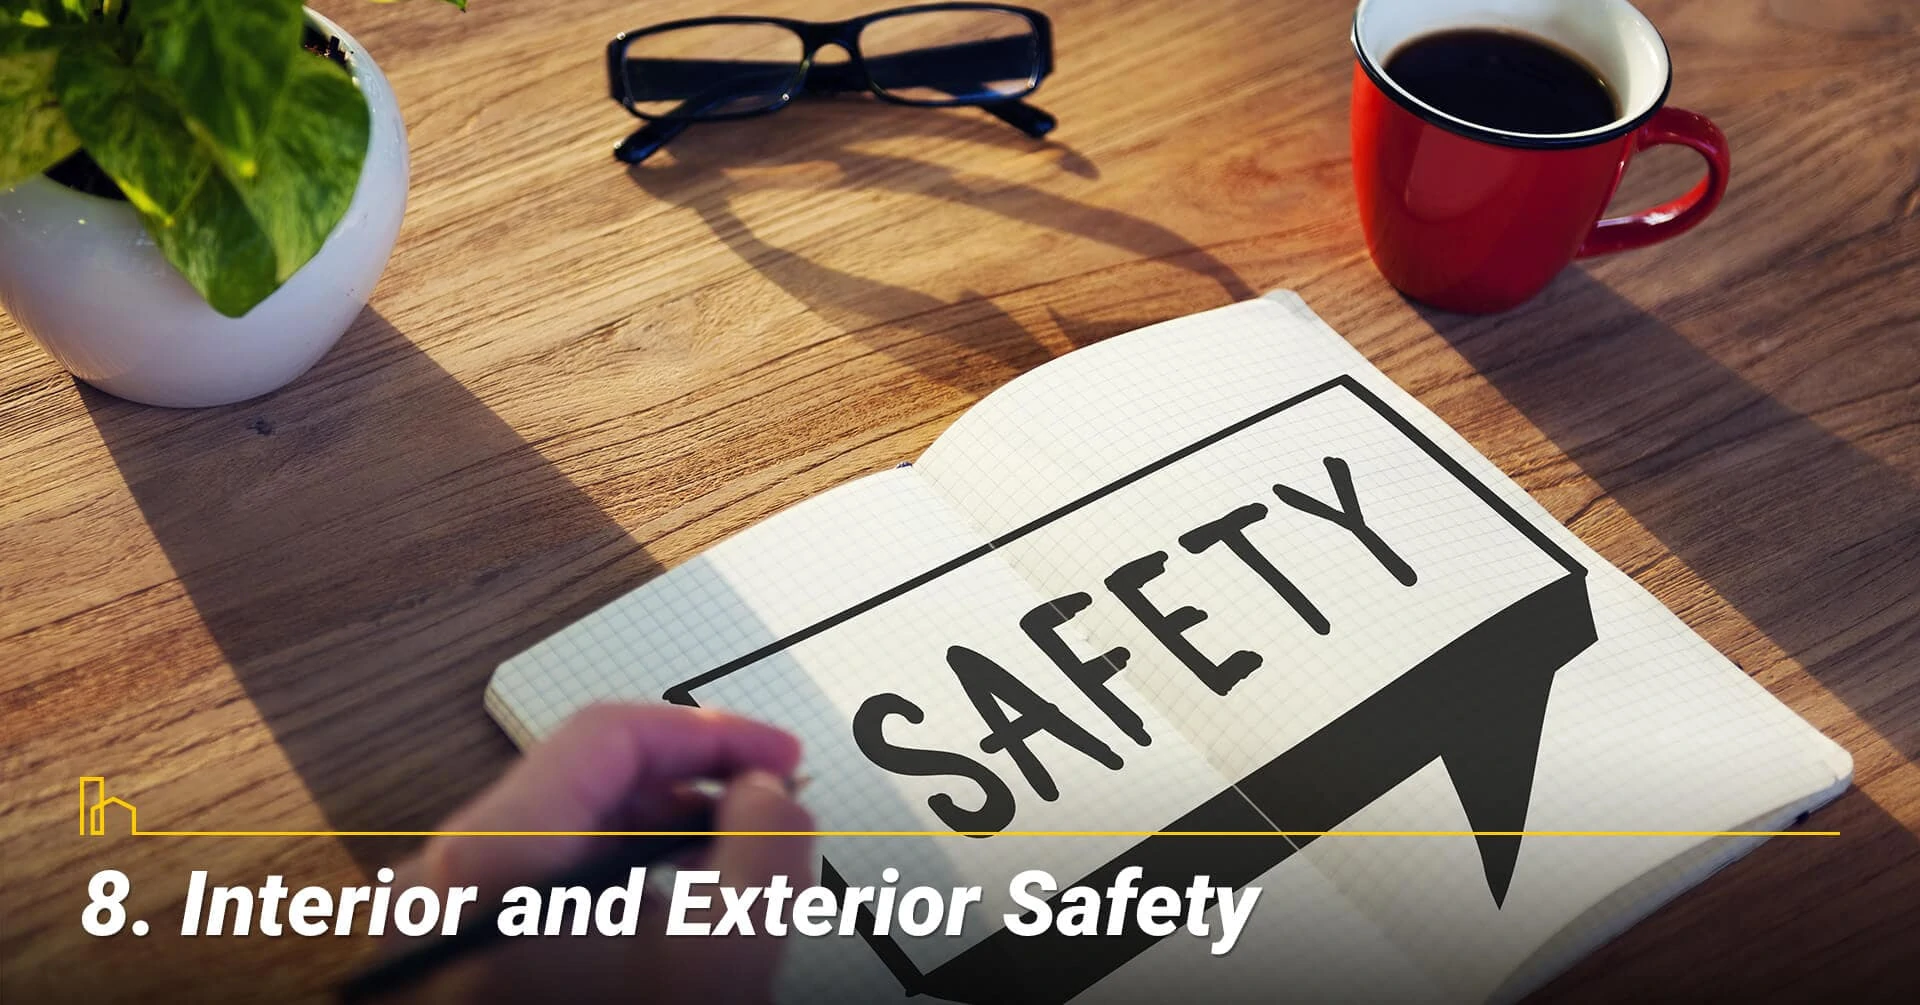 Interior and Exterior Safety, keep it safe inside and outside